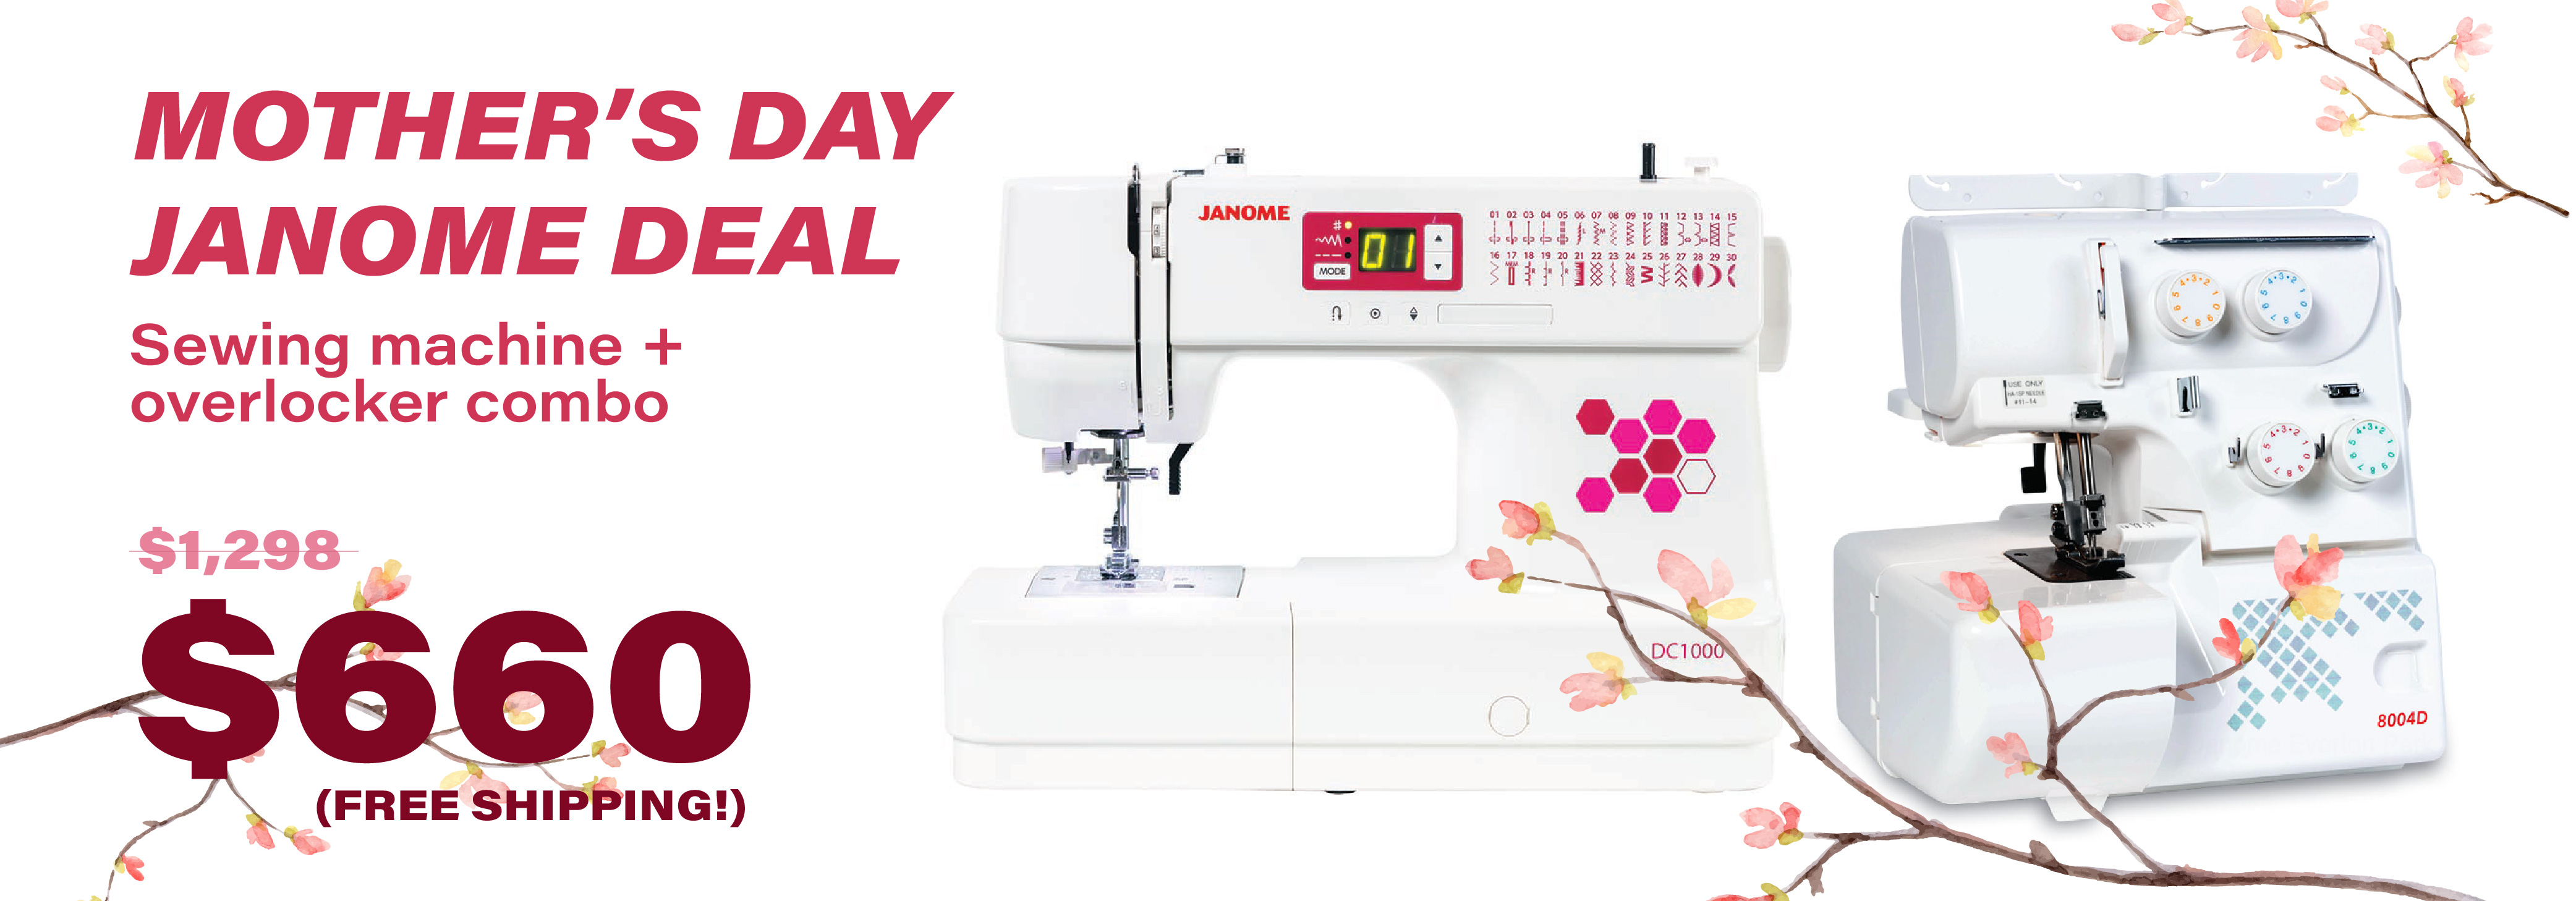 Janome Deal Banner 01